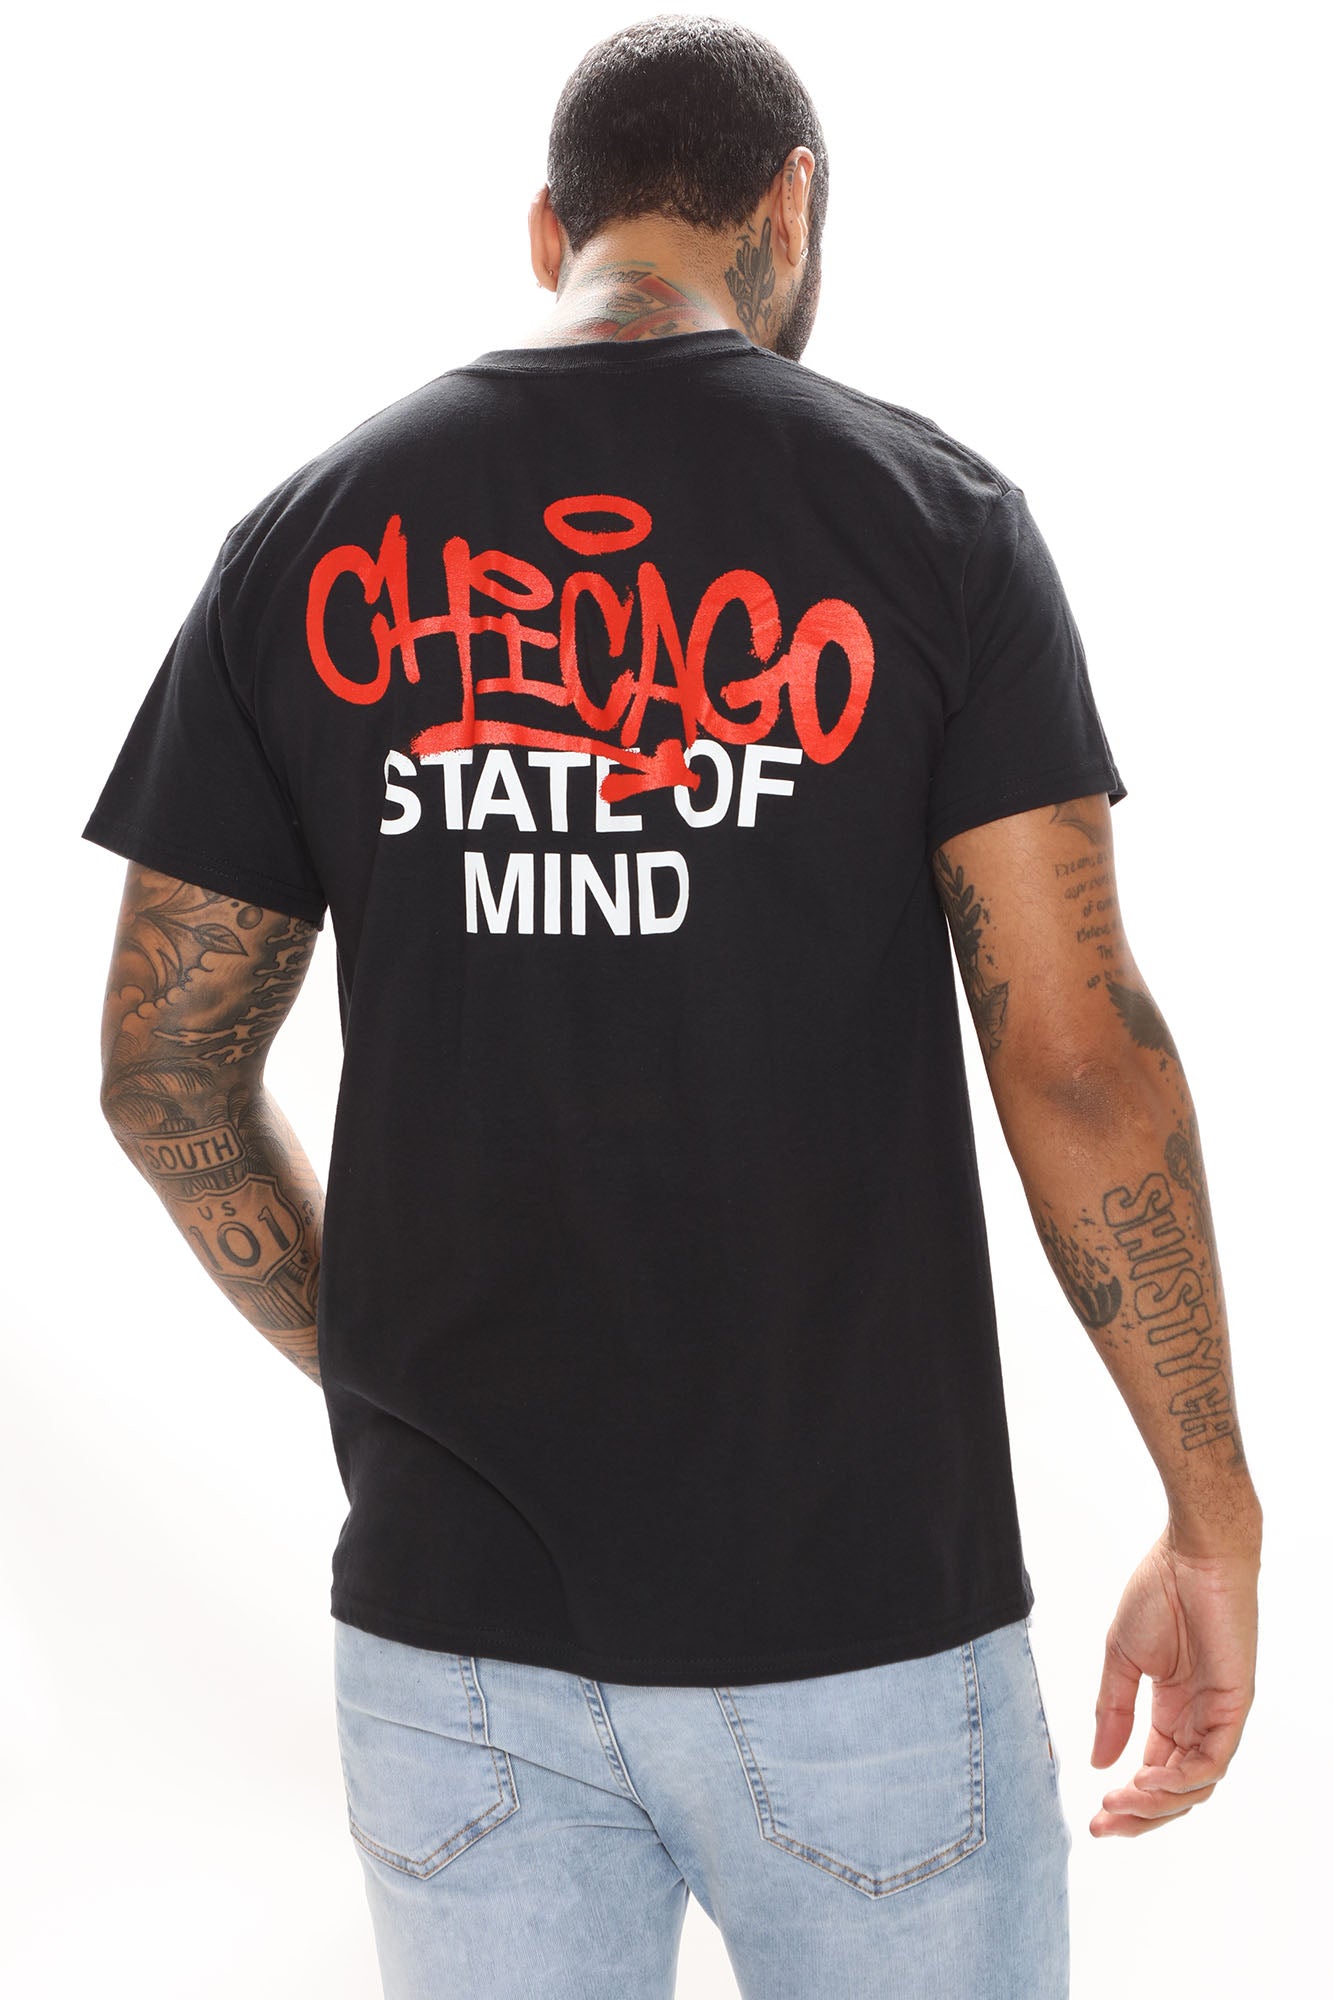 Chicago Band Fashion Men's T Shirt Tops Short Sleeve Casual Tees 